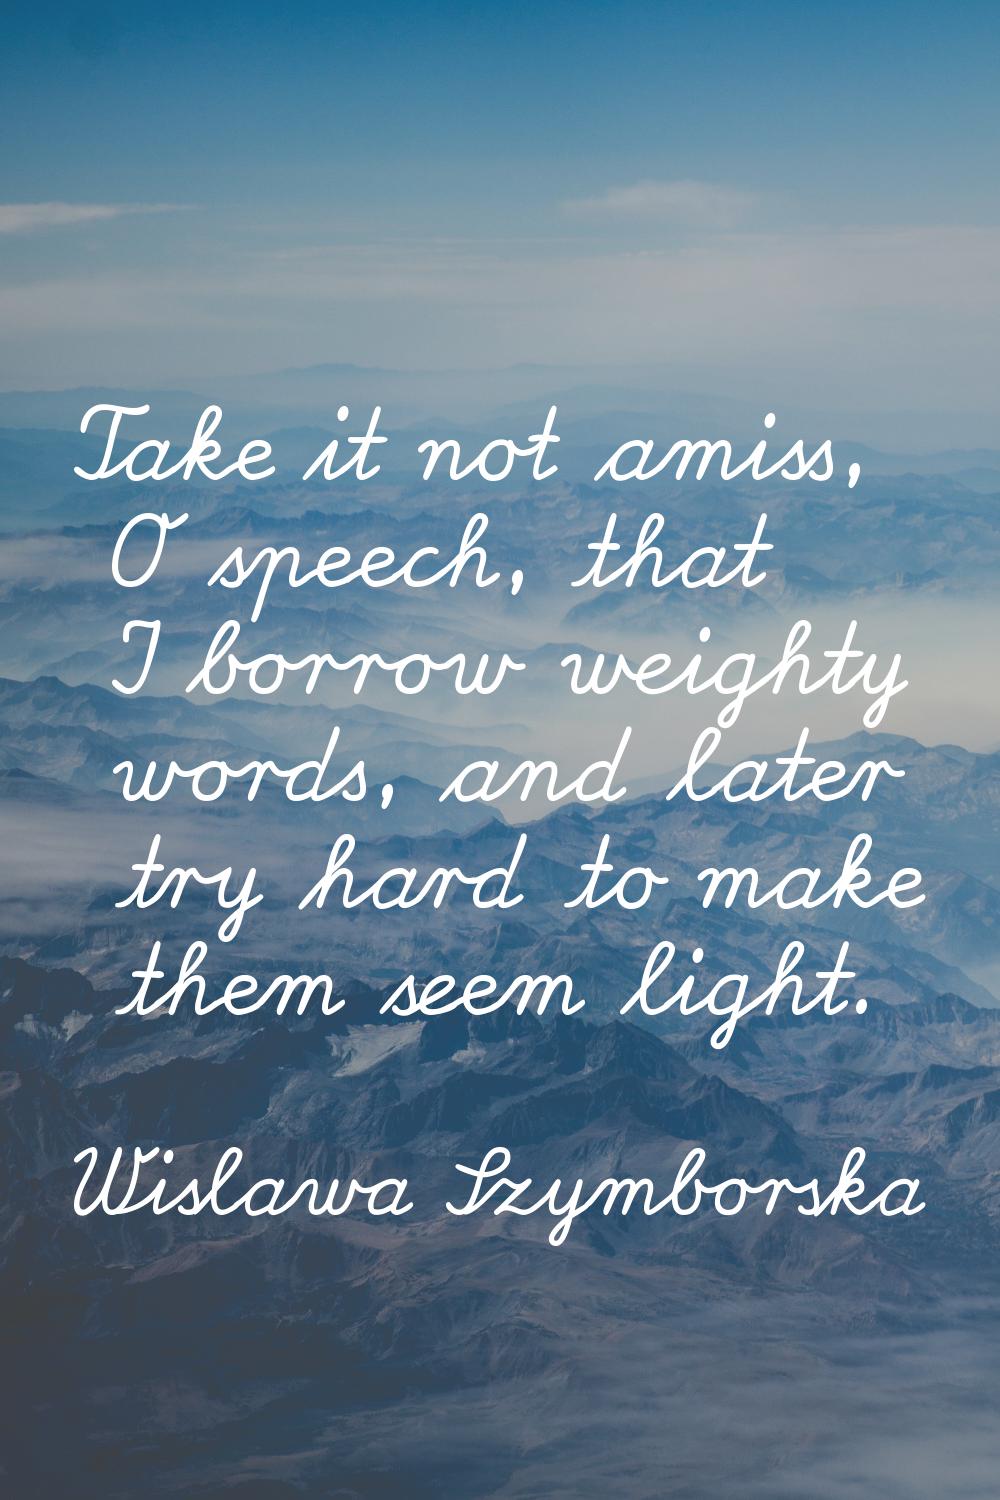 Take it not amiss, O speech, that I borrow weighty words, and later try hard to make them seem ligh